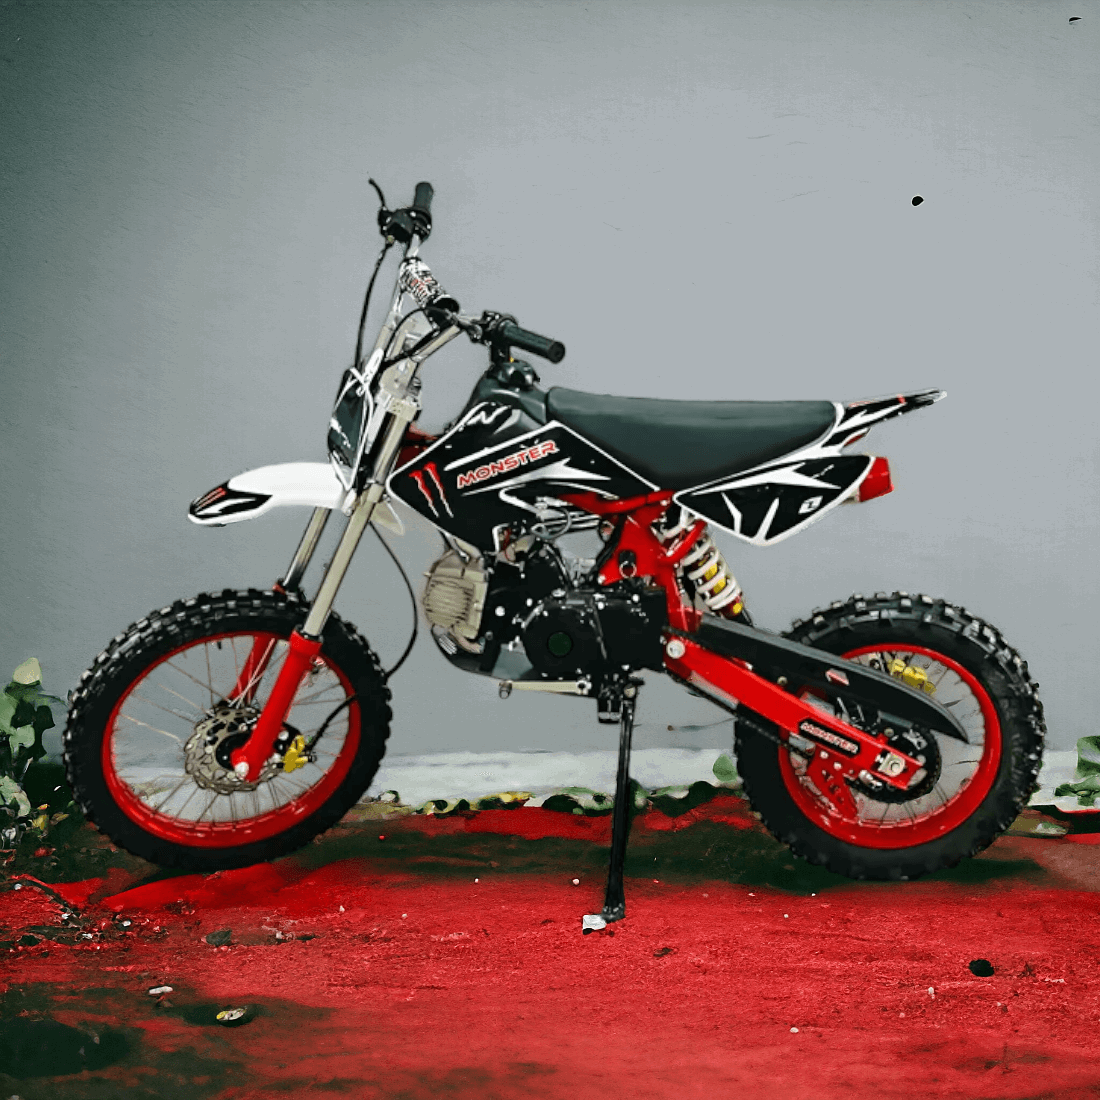 PATOYS | 125cc-Dirt bike Super Motocross for adults/youngsters 4 stroke engine for age group above 15 yrs Red Petrol Bike PATOYS